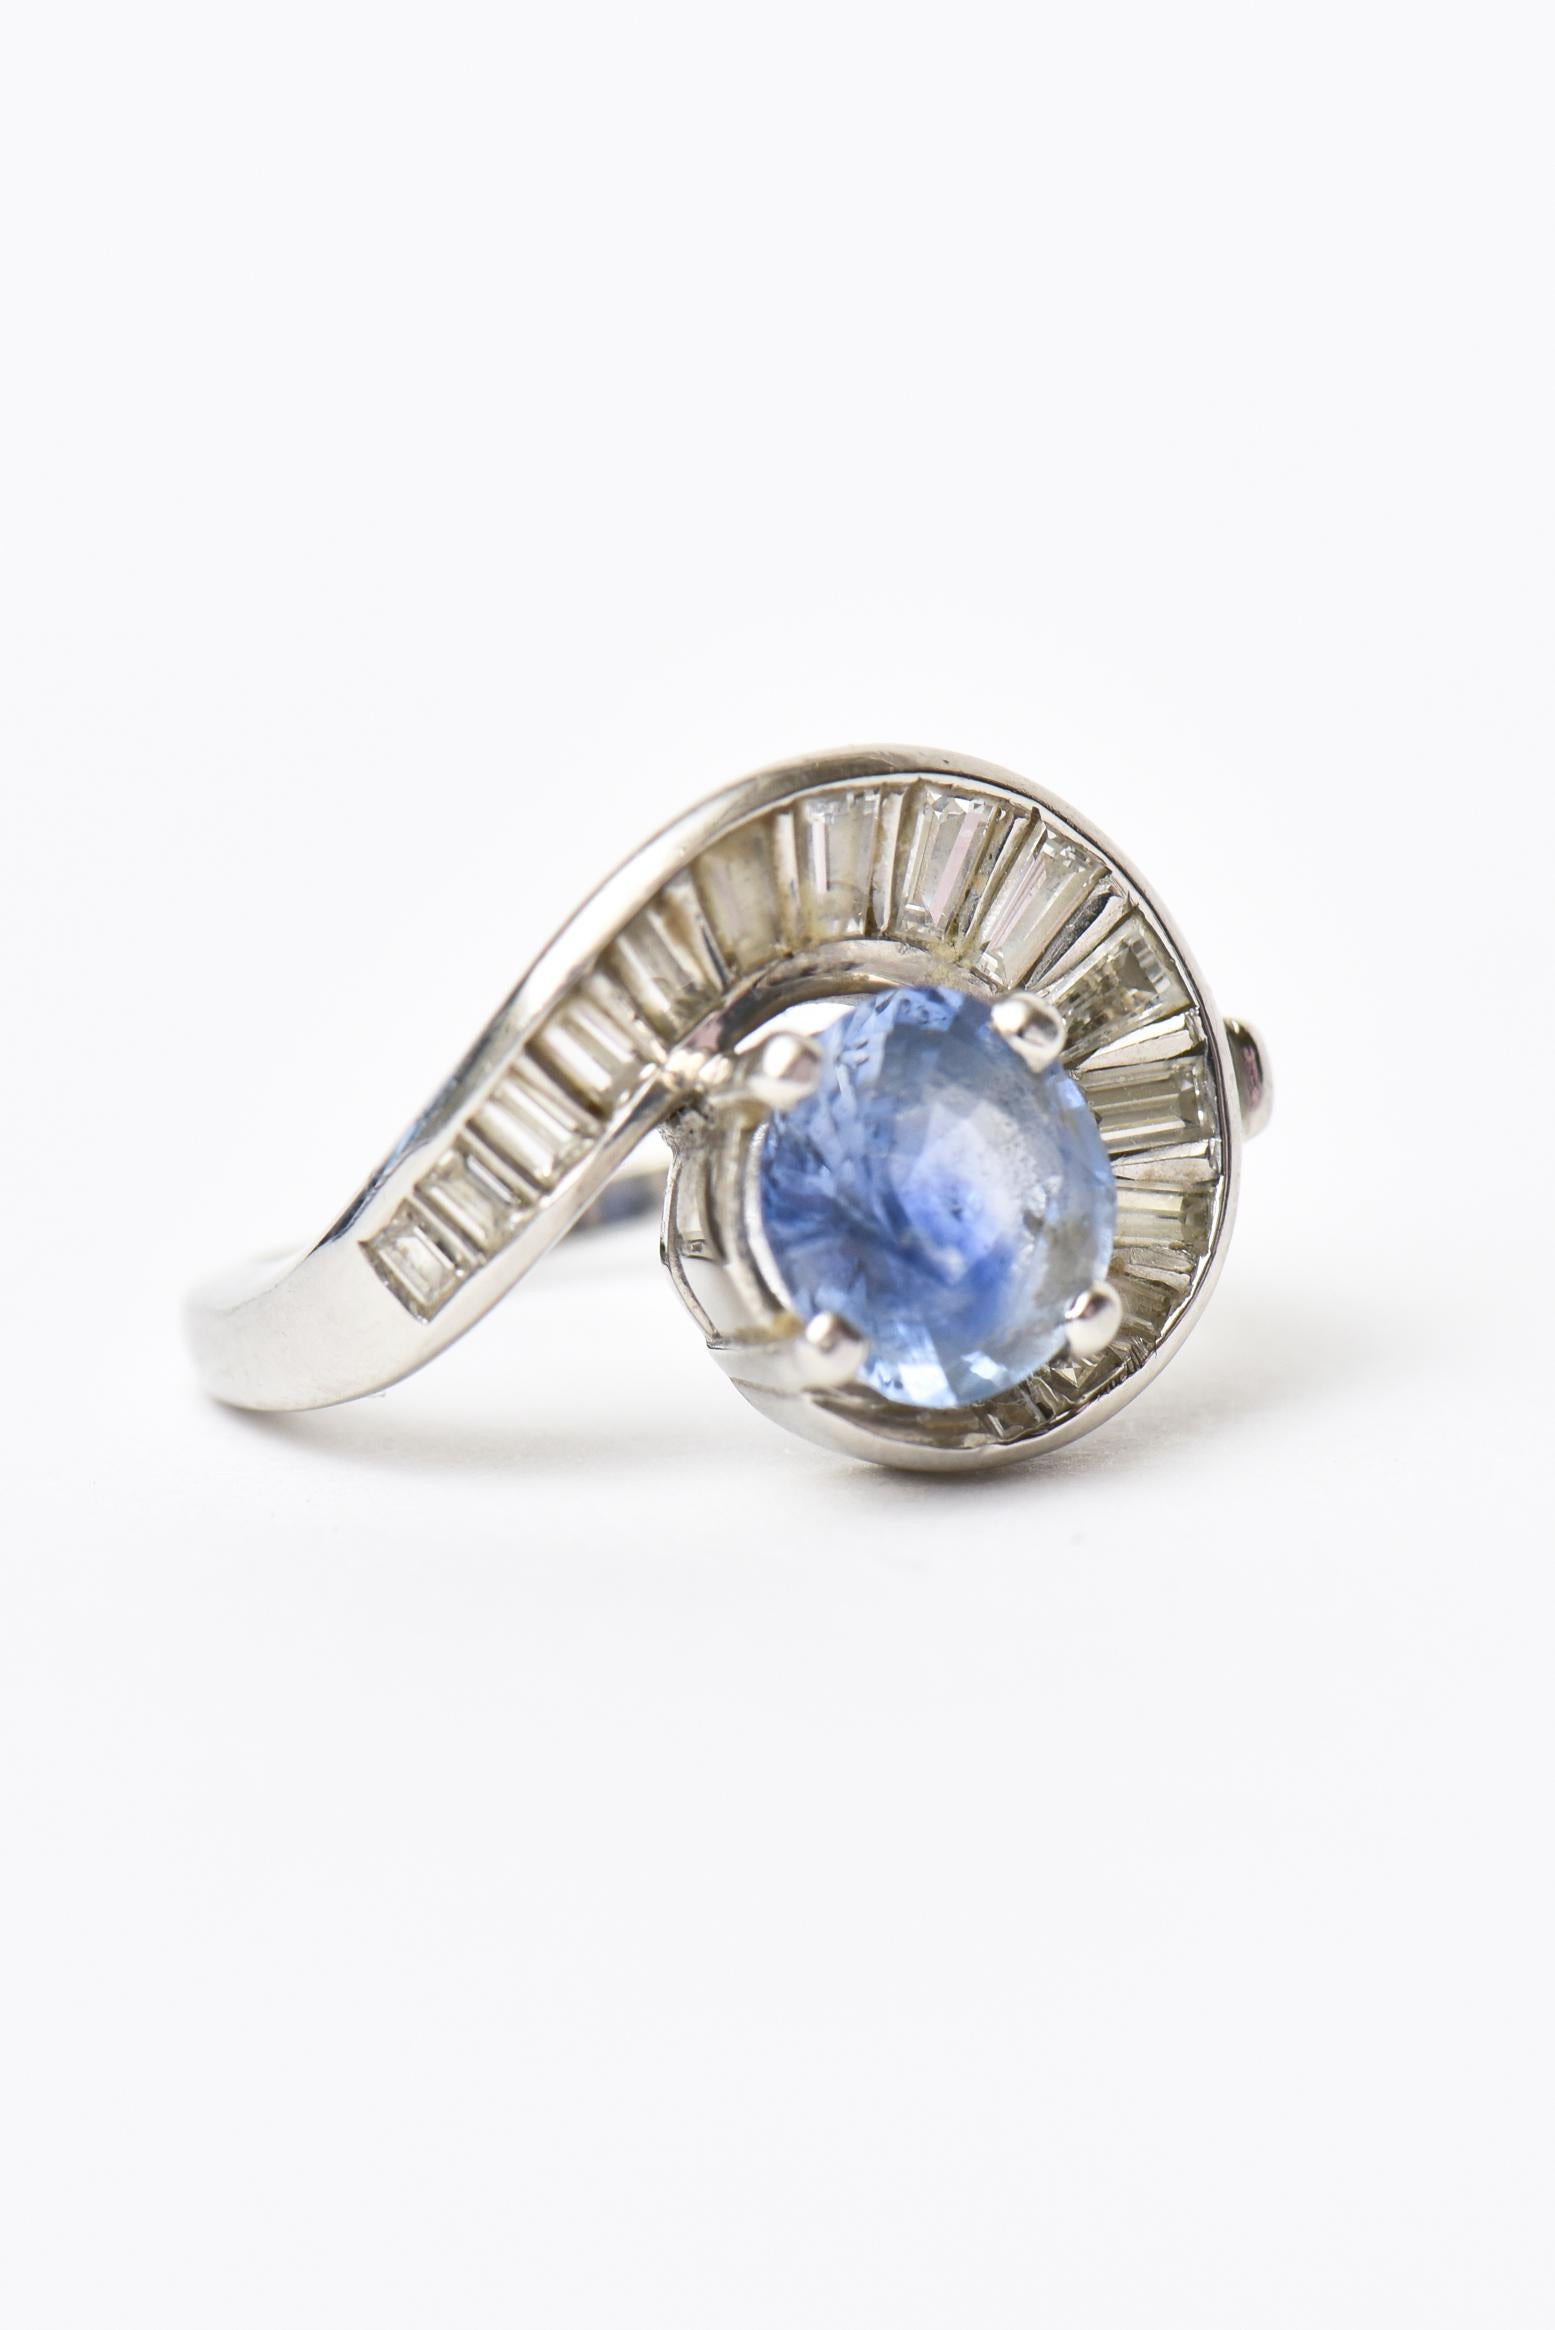 This lovely art deco ring has swirls of diamond baguettes that are 3/4 of a carat surrounded by light blue sapphire. It is all set in platinum. The sapphire stone is 1.85 carat. The ring is 5 DWT. It is a size 6. Platinum rings are more collectable